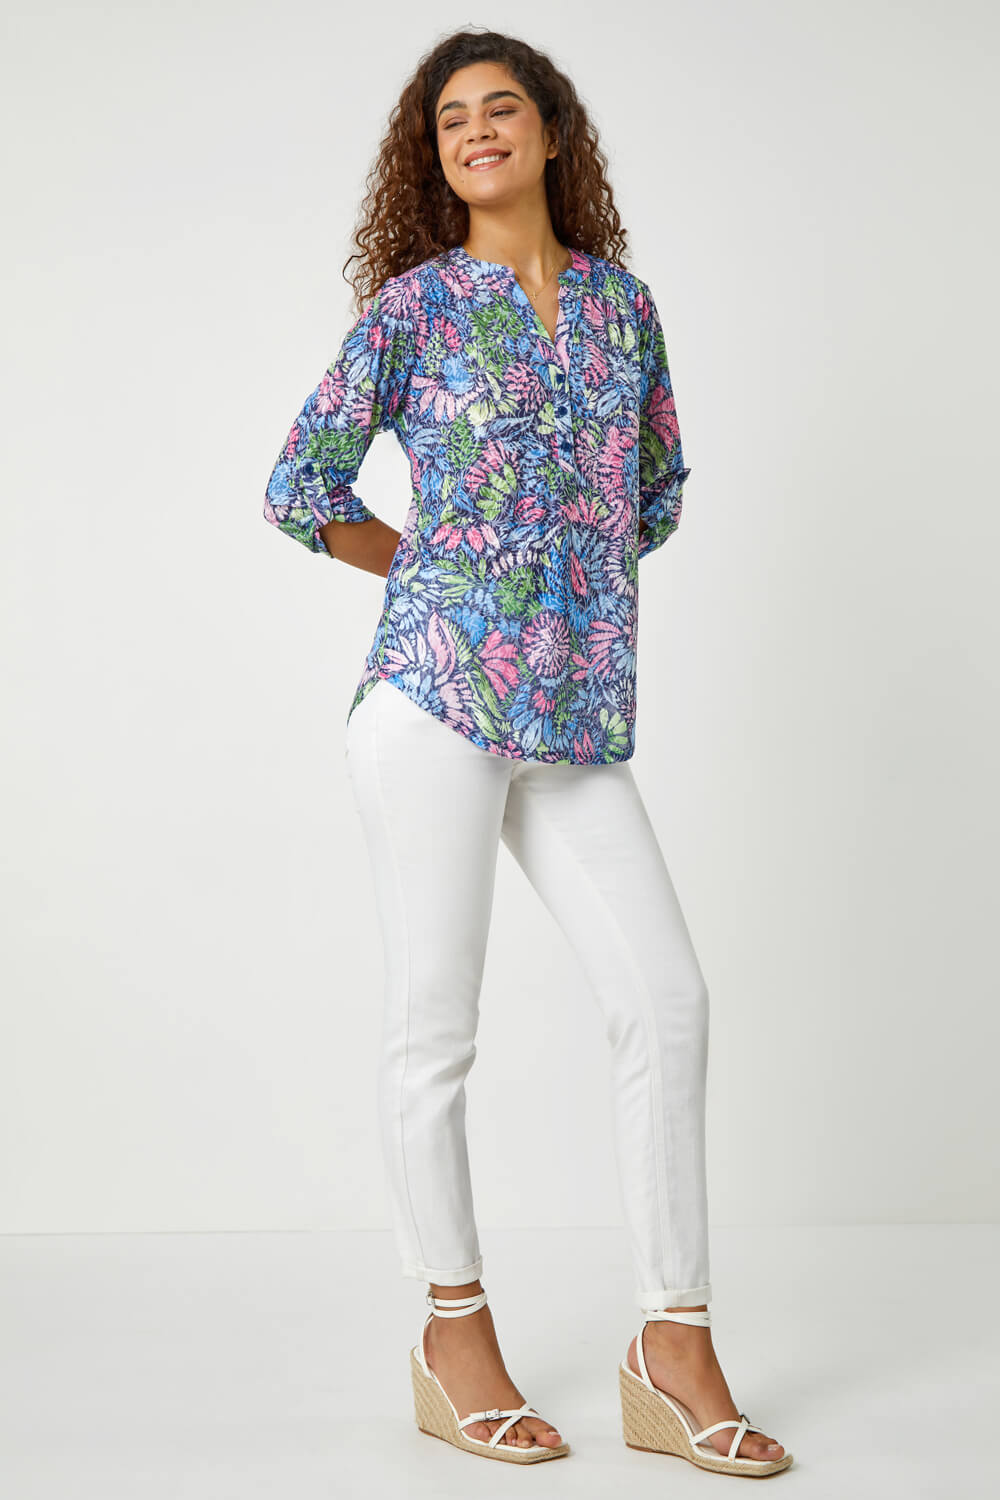 PINK Textured Floral Print Stretch Shirt, Image 2 of 5